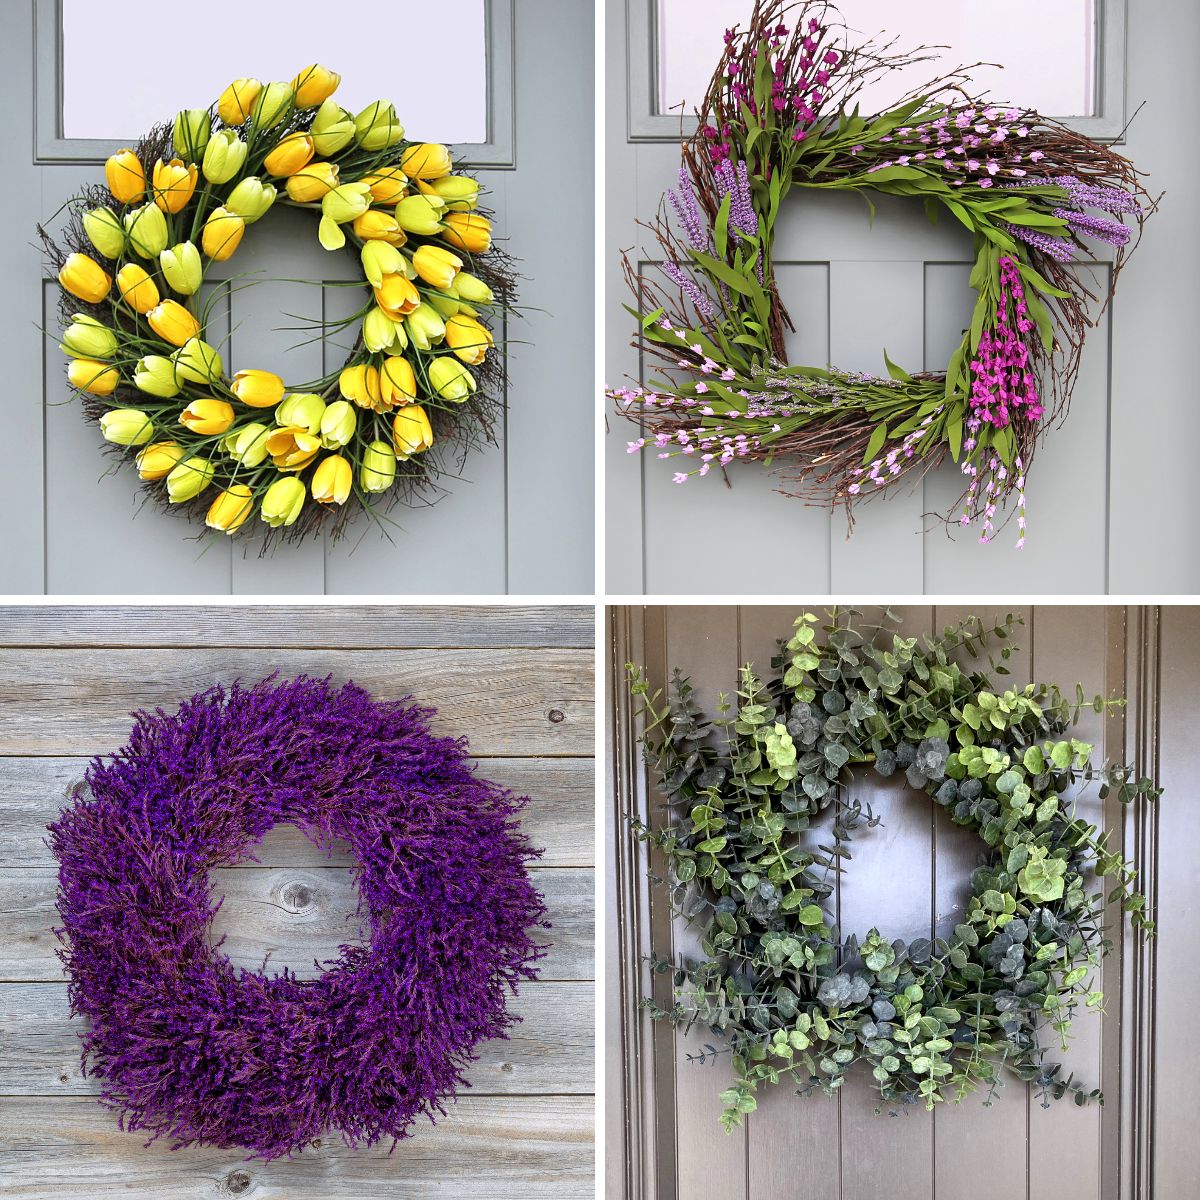 Collage of 4 wreaths: top left yellow tulips wreath, top right spring purple flowers wreath, bottom right eucalyptus wreath, bottom left lavender wreath.